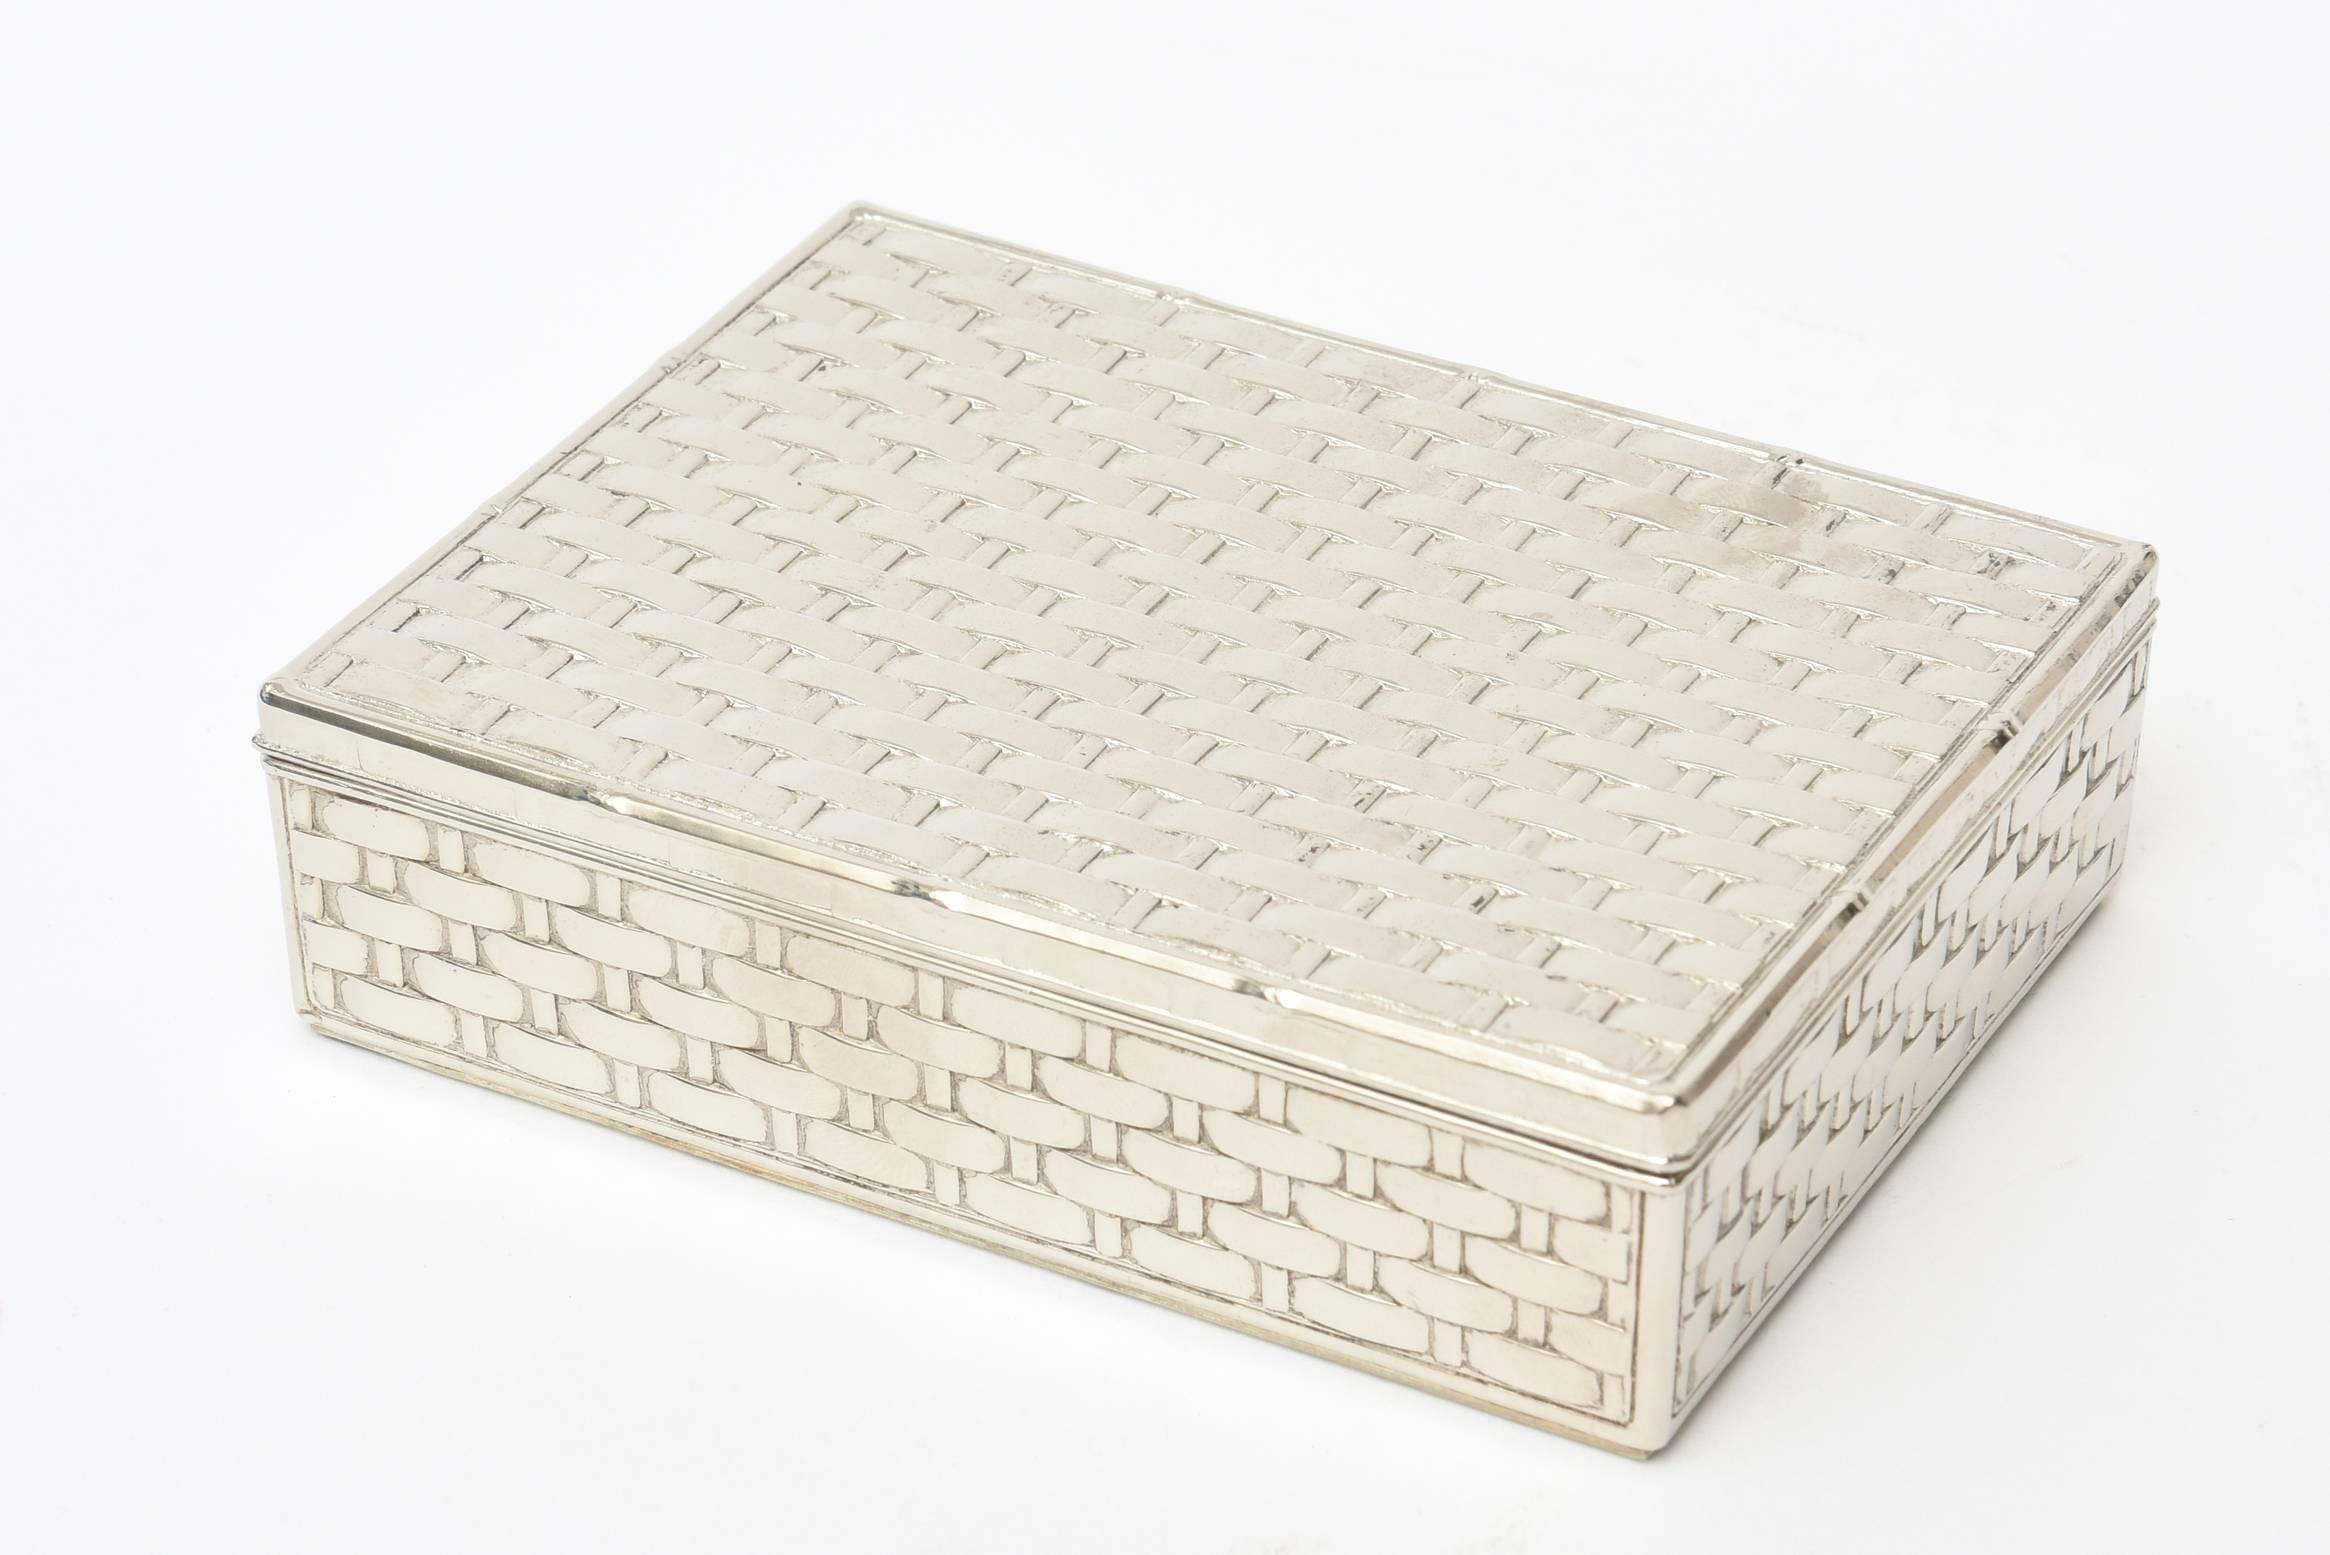 This lovely vintage hinged French silver plate box by Creation Marcel Rochas is a beautiful basket weave of silver plate design with textural dimensions. It has been re-plated. This is great desk accessory, or for a coffee table and or console. It